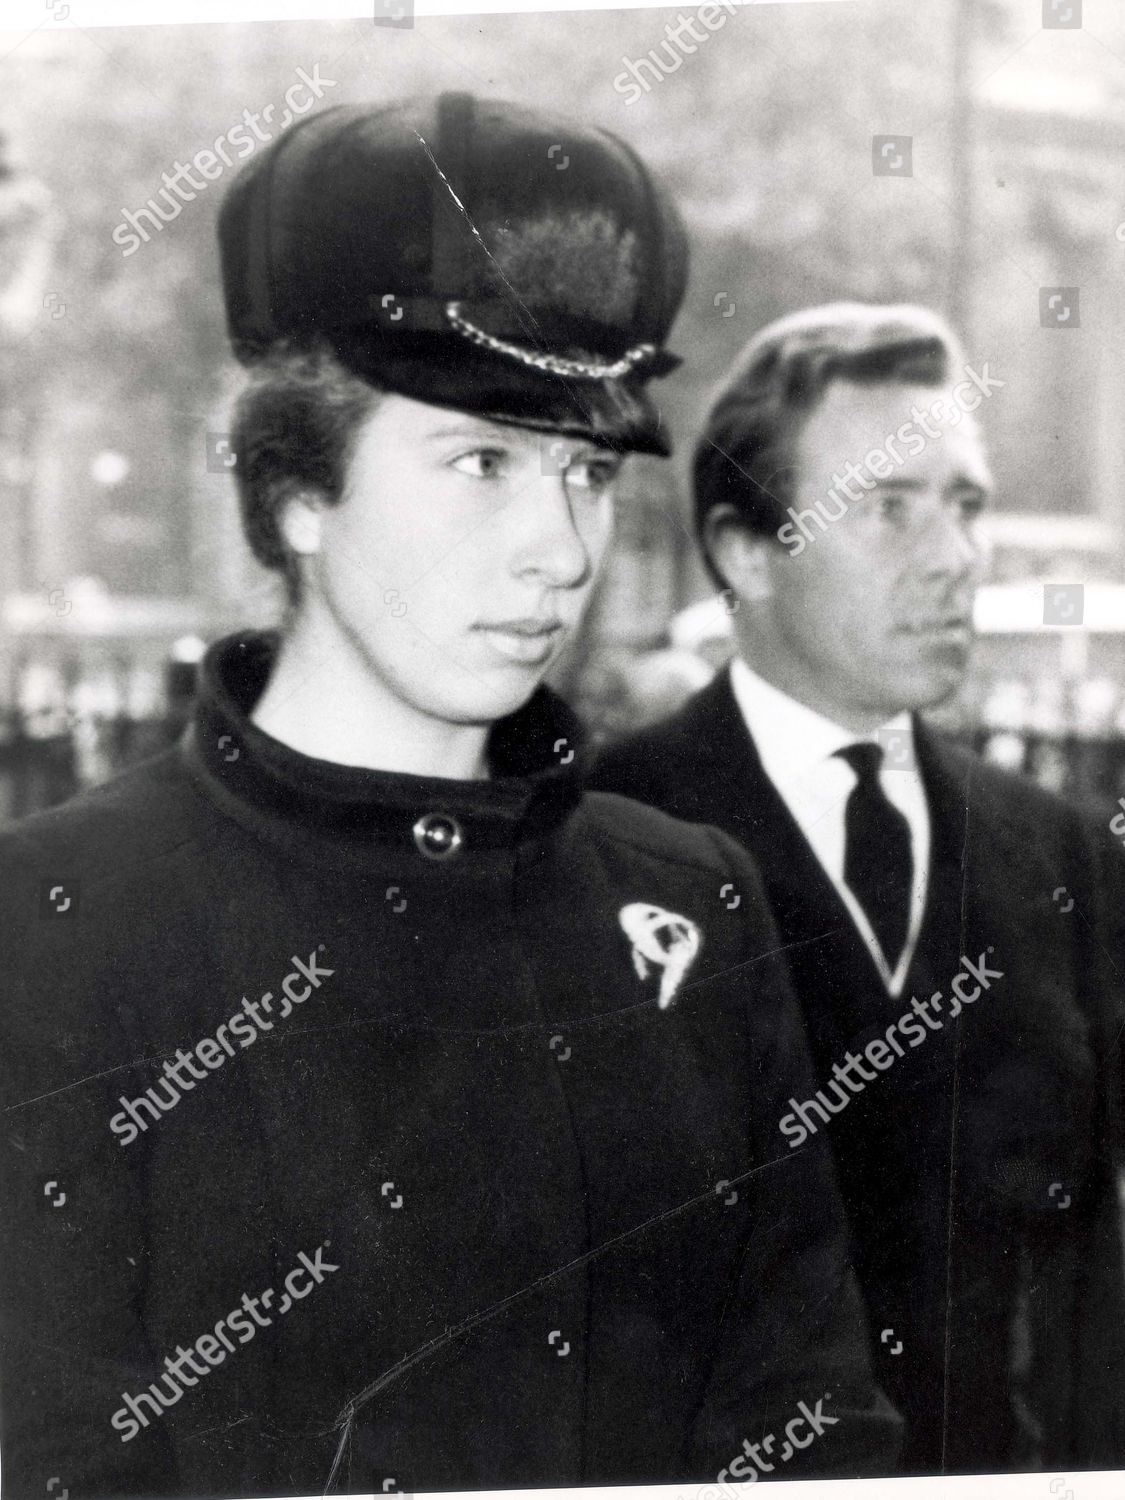 princess-anne-now-princess-royal-1968-picture-shows-princess-anne-attending-a-memorial-service-at-westminster-abbey-for-princess-marina-shutterstock-editorial-890793a.jpg